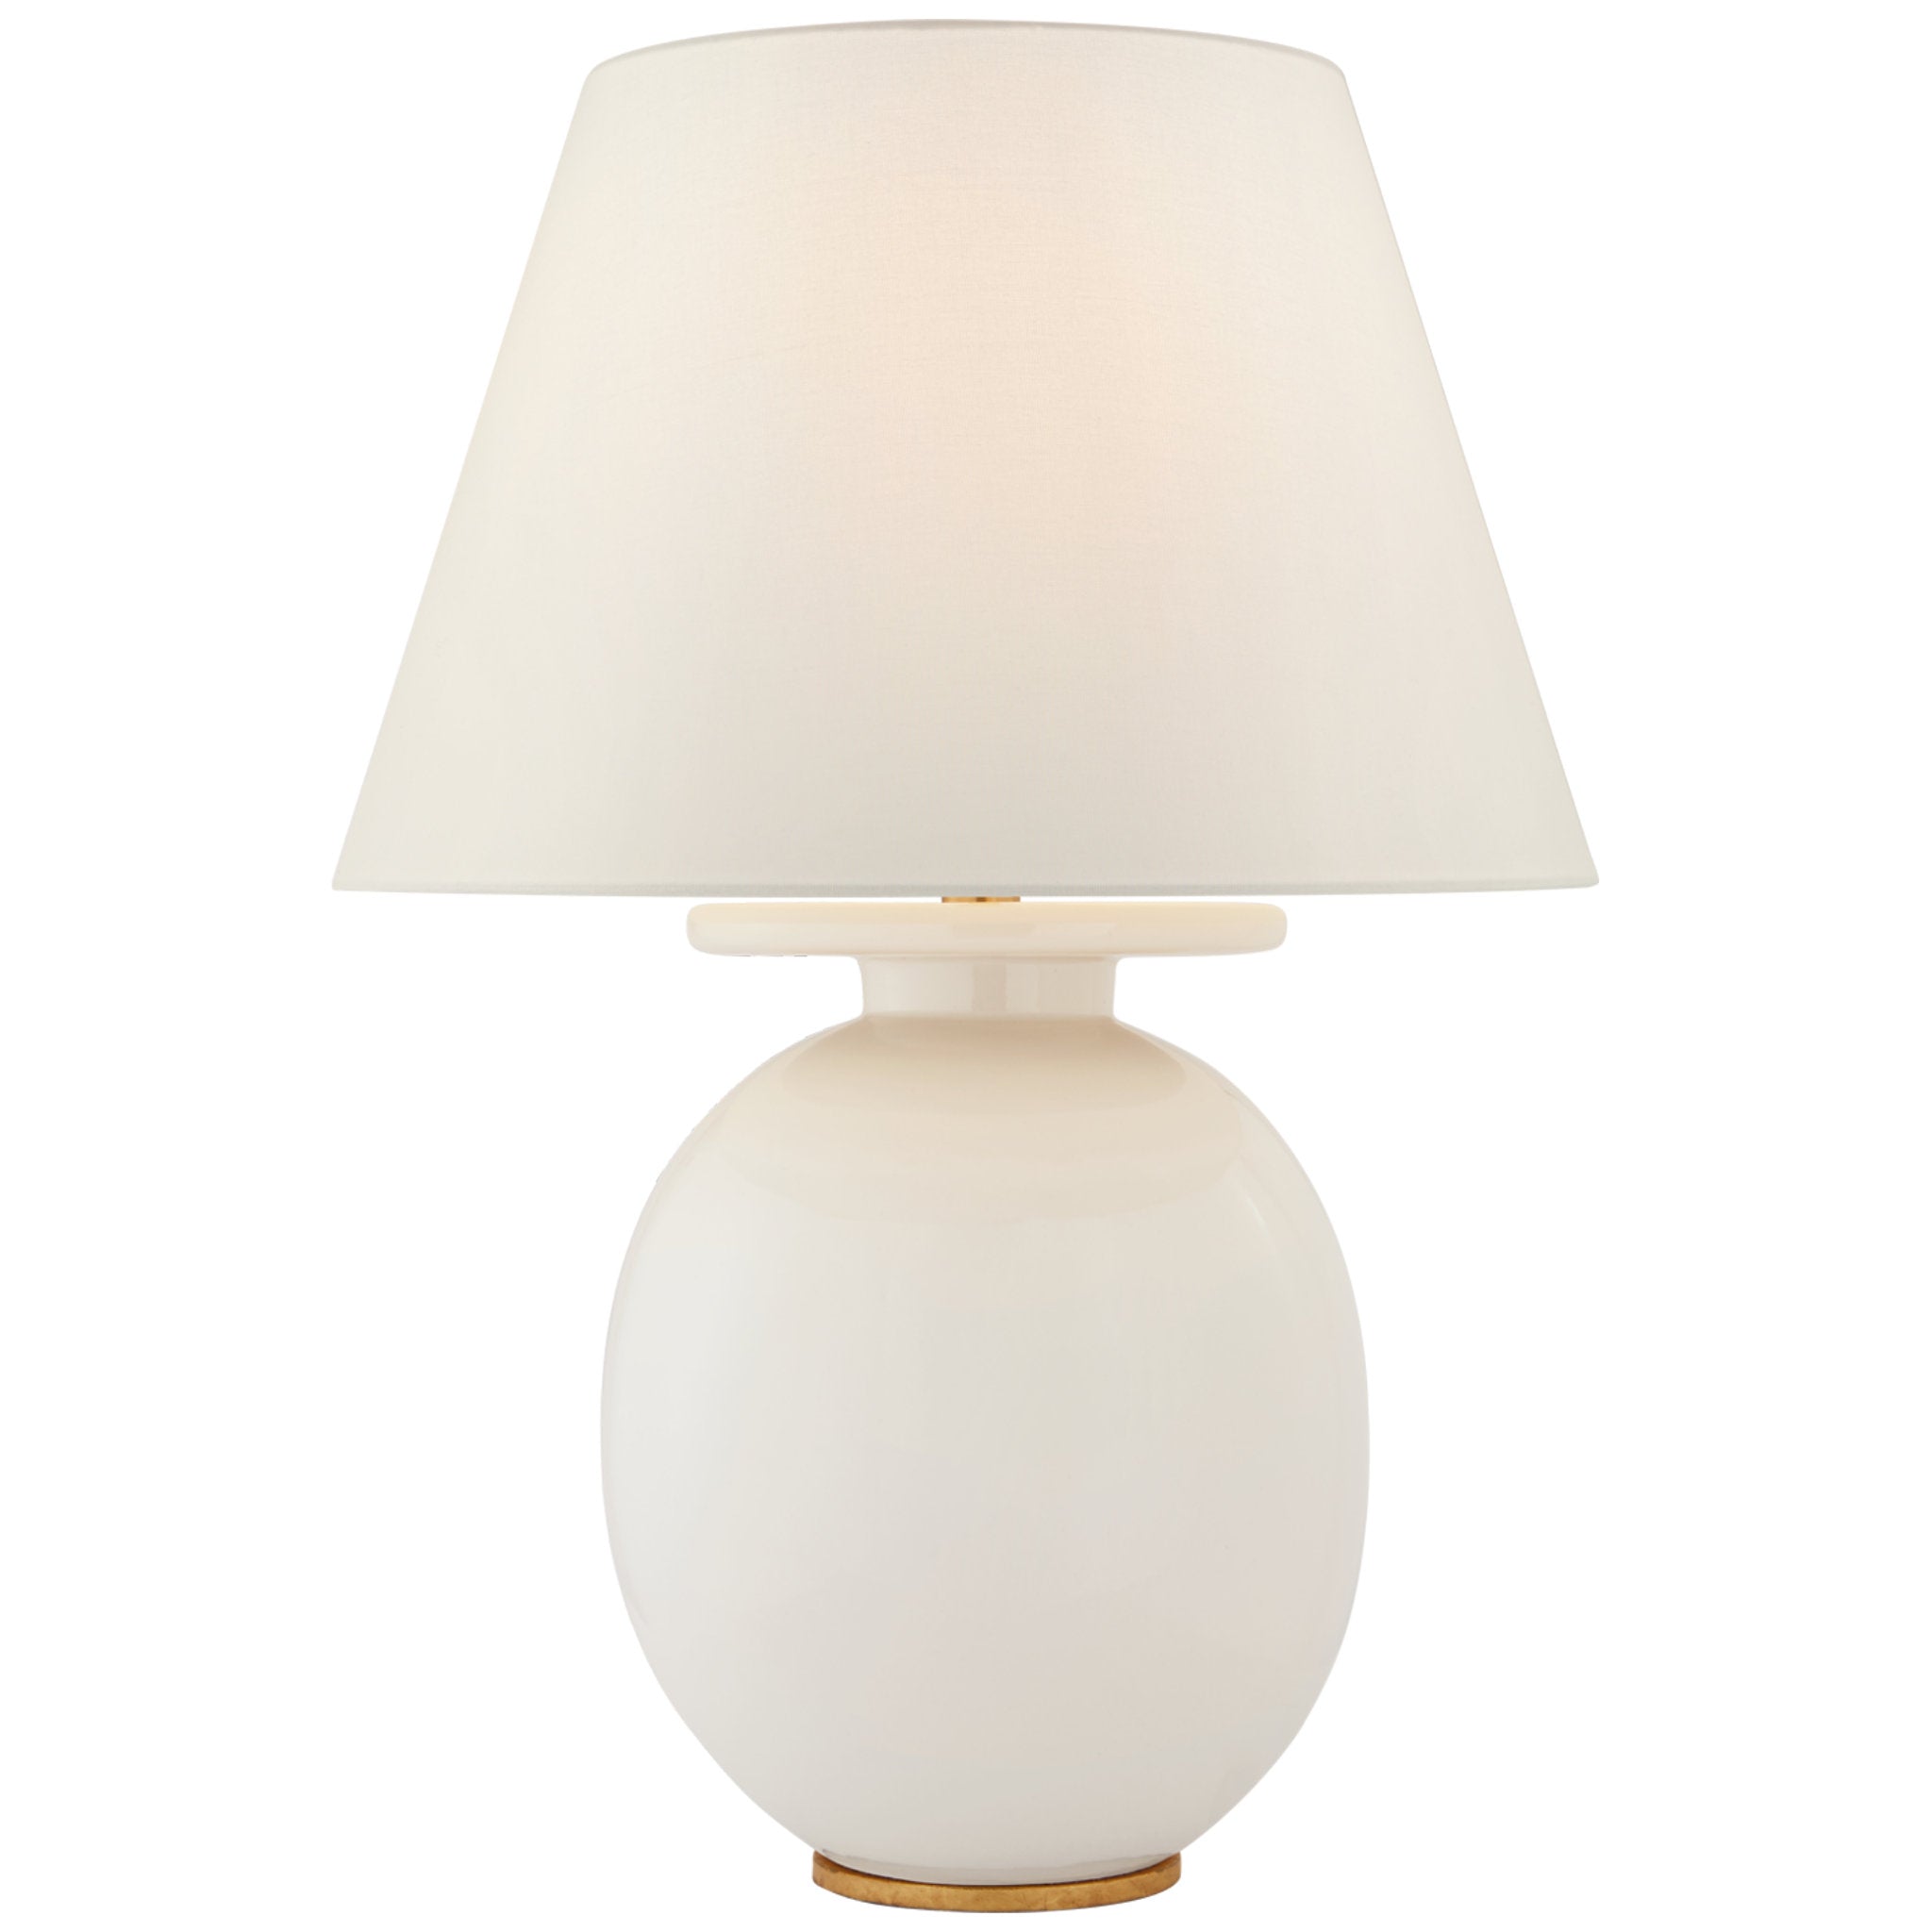 Christopher Spitzmiller Hans Medium Table Lamp in Ivory with Linen Shade